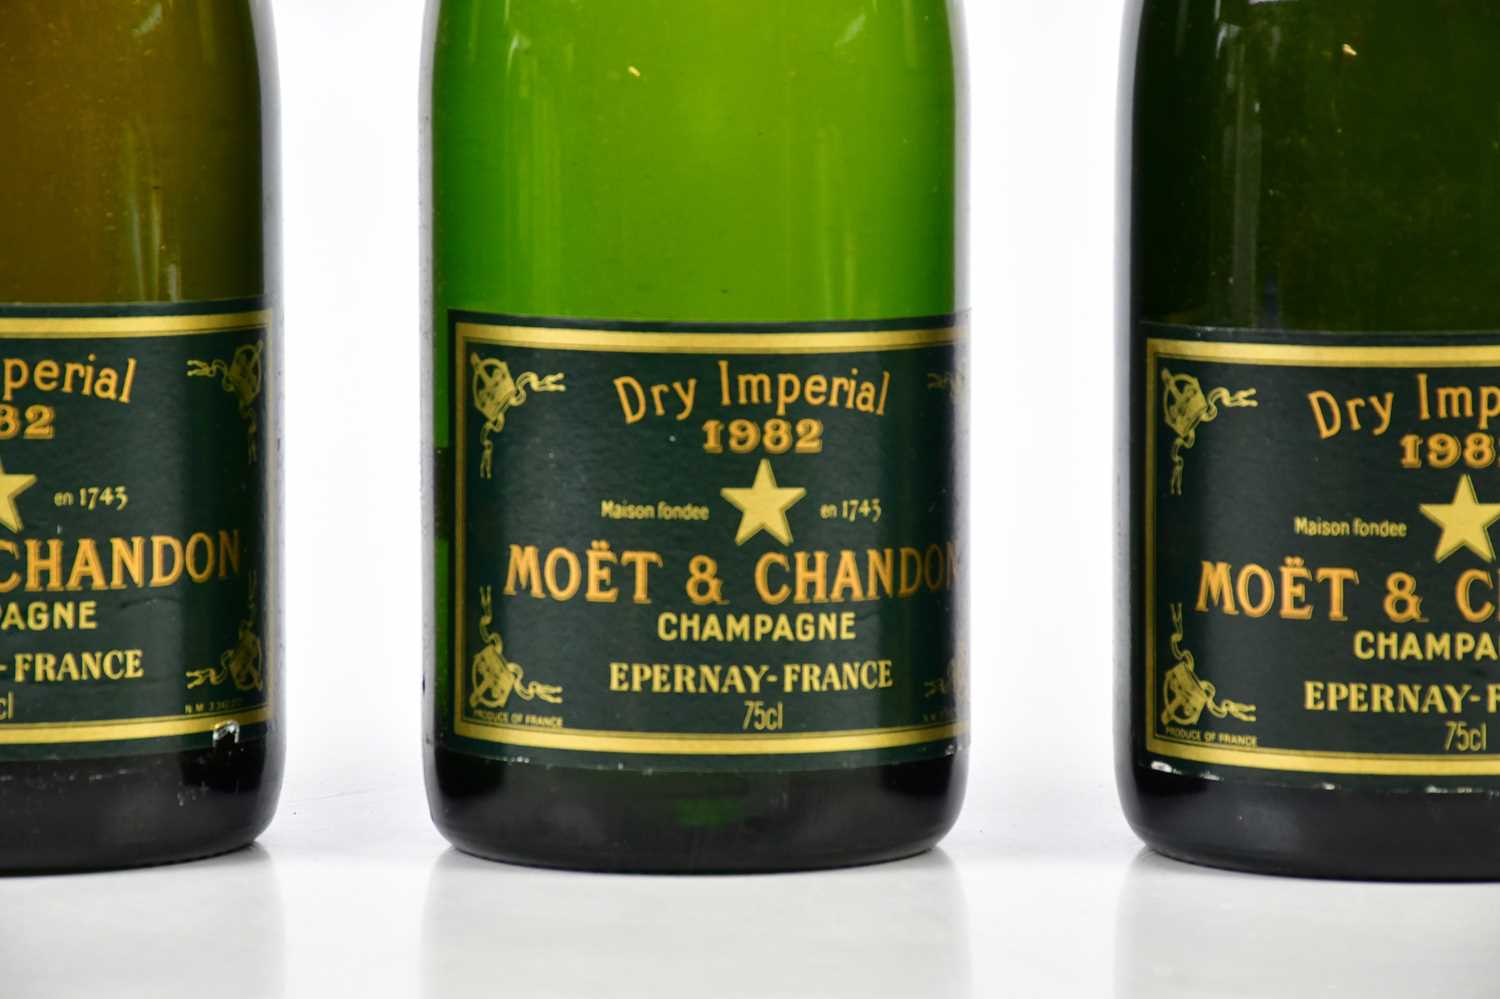 CHAMPAGNE; three bottles Moet & Chandon 1982, Dry Imperial, 75cl. - Image 3 of 4